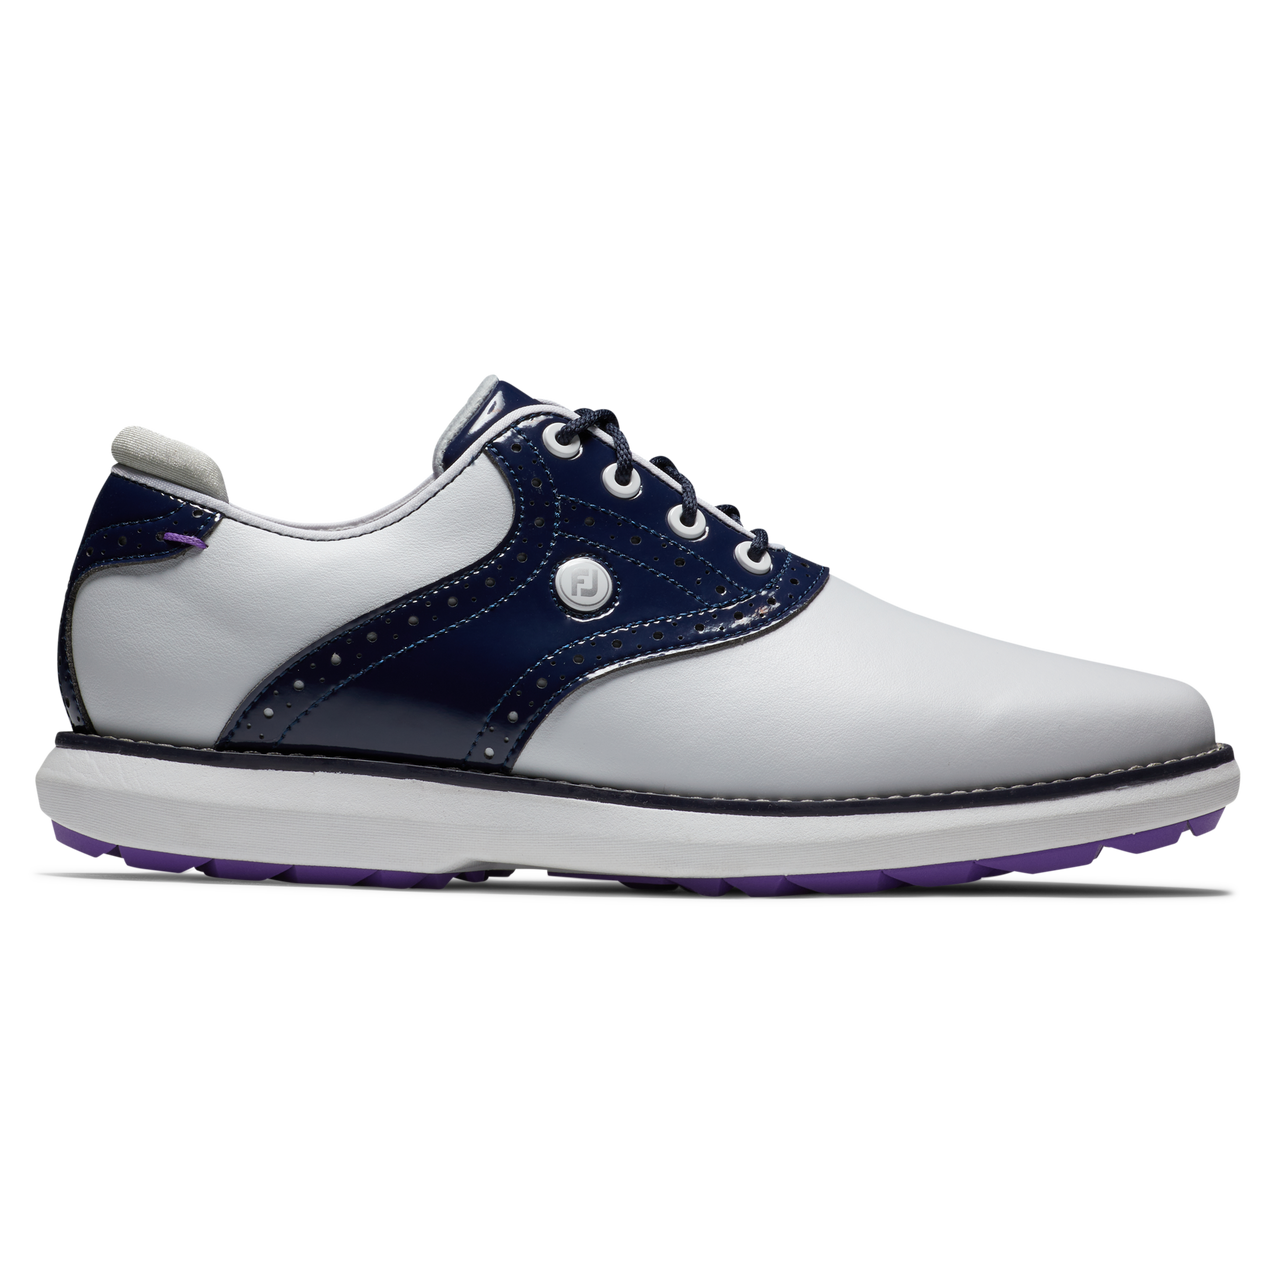 Women's Traditions Spikeless Golf Shoe - White/Navy